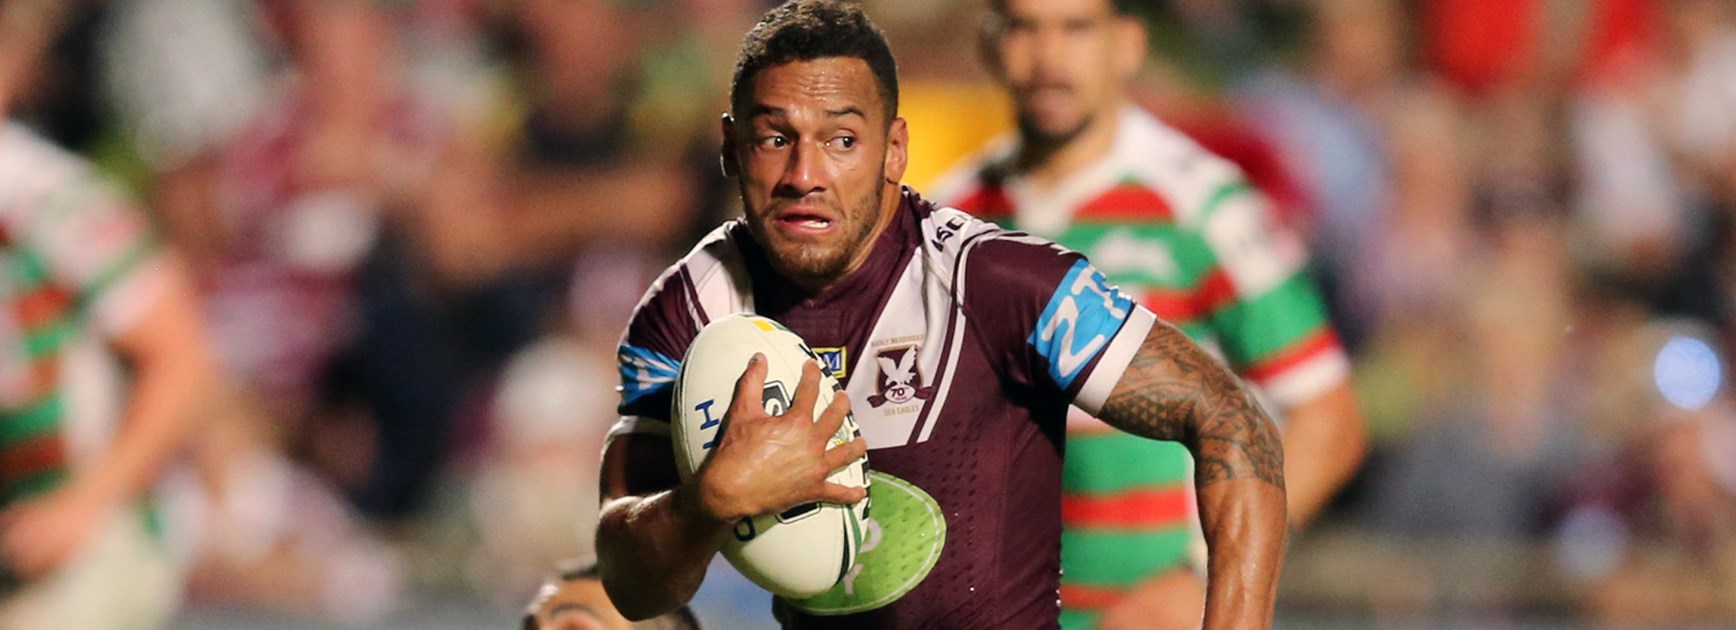 Sea Eagles halfback Apisai Koroisau scored a try against Souths in Round 5.